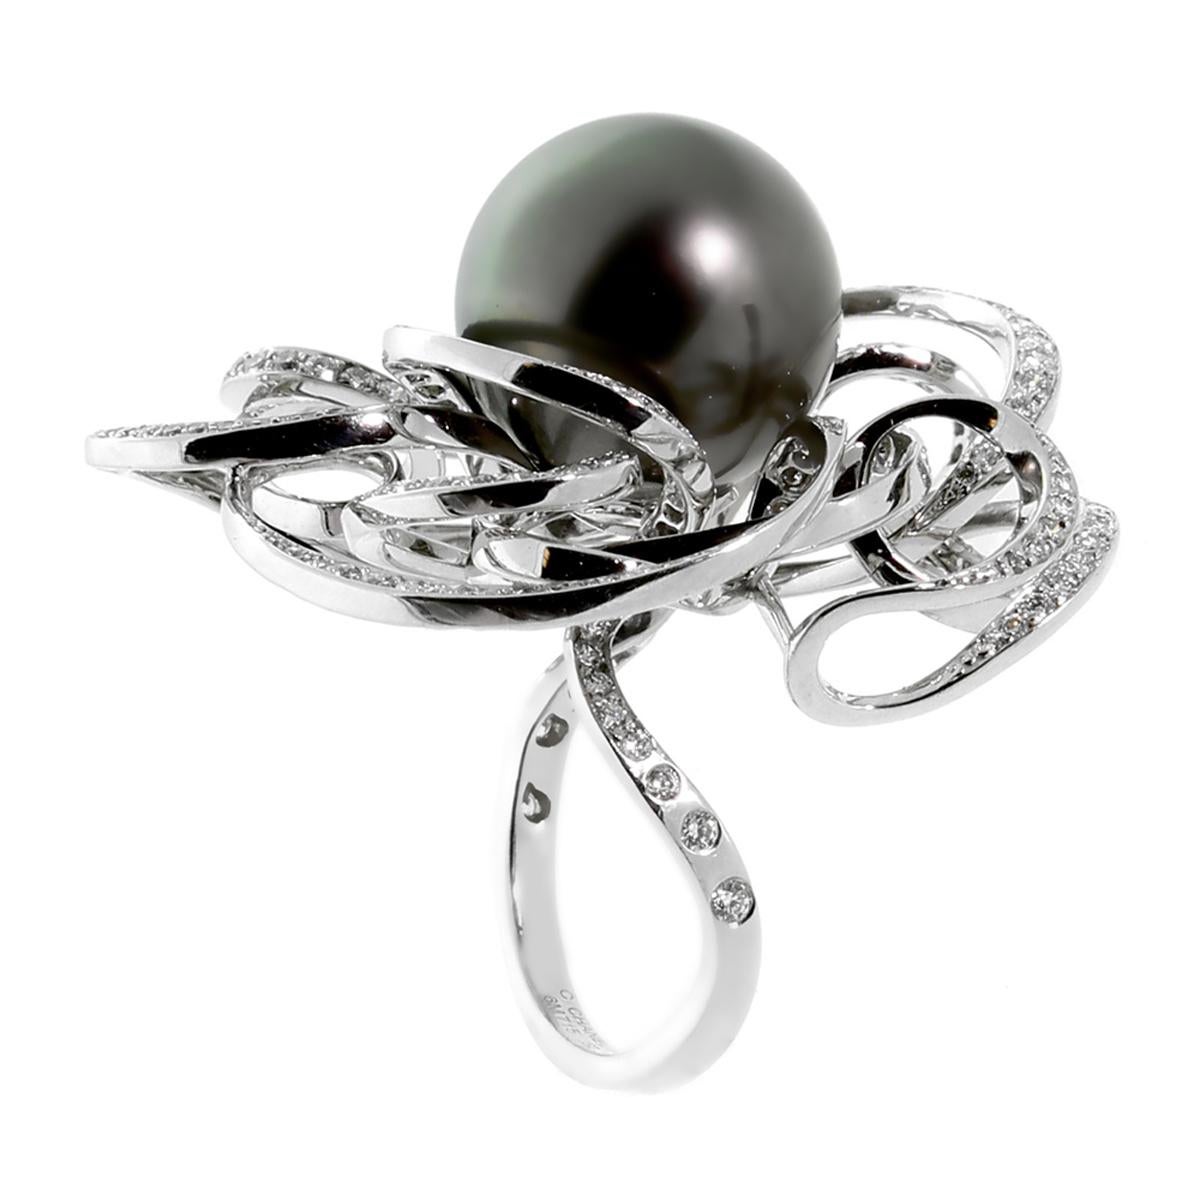 A magnificent Chanel cocktail ring featuring a 14.5mm pearl surrounded by 1.44ct of shimmering Chanel round brilliant cut diamonds in 18k white gold. The ring measures 1.41